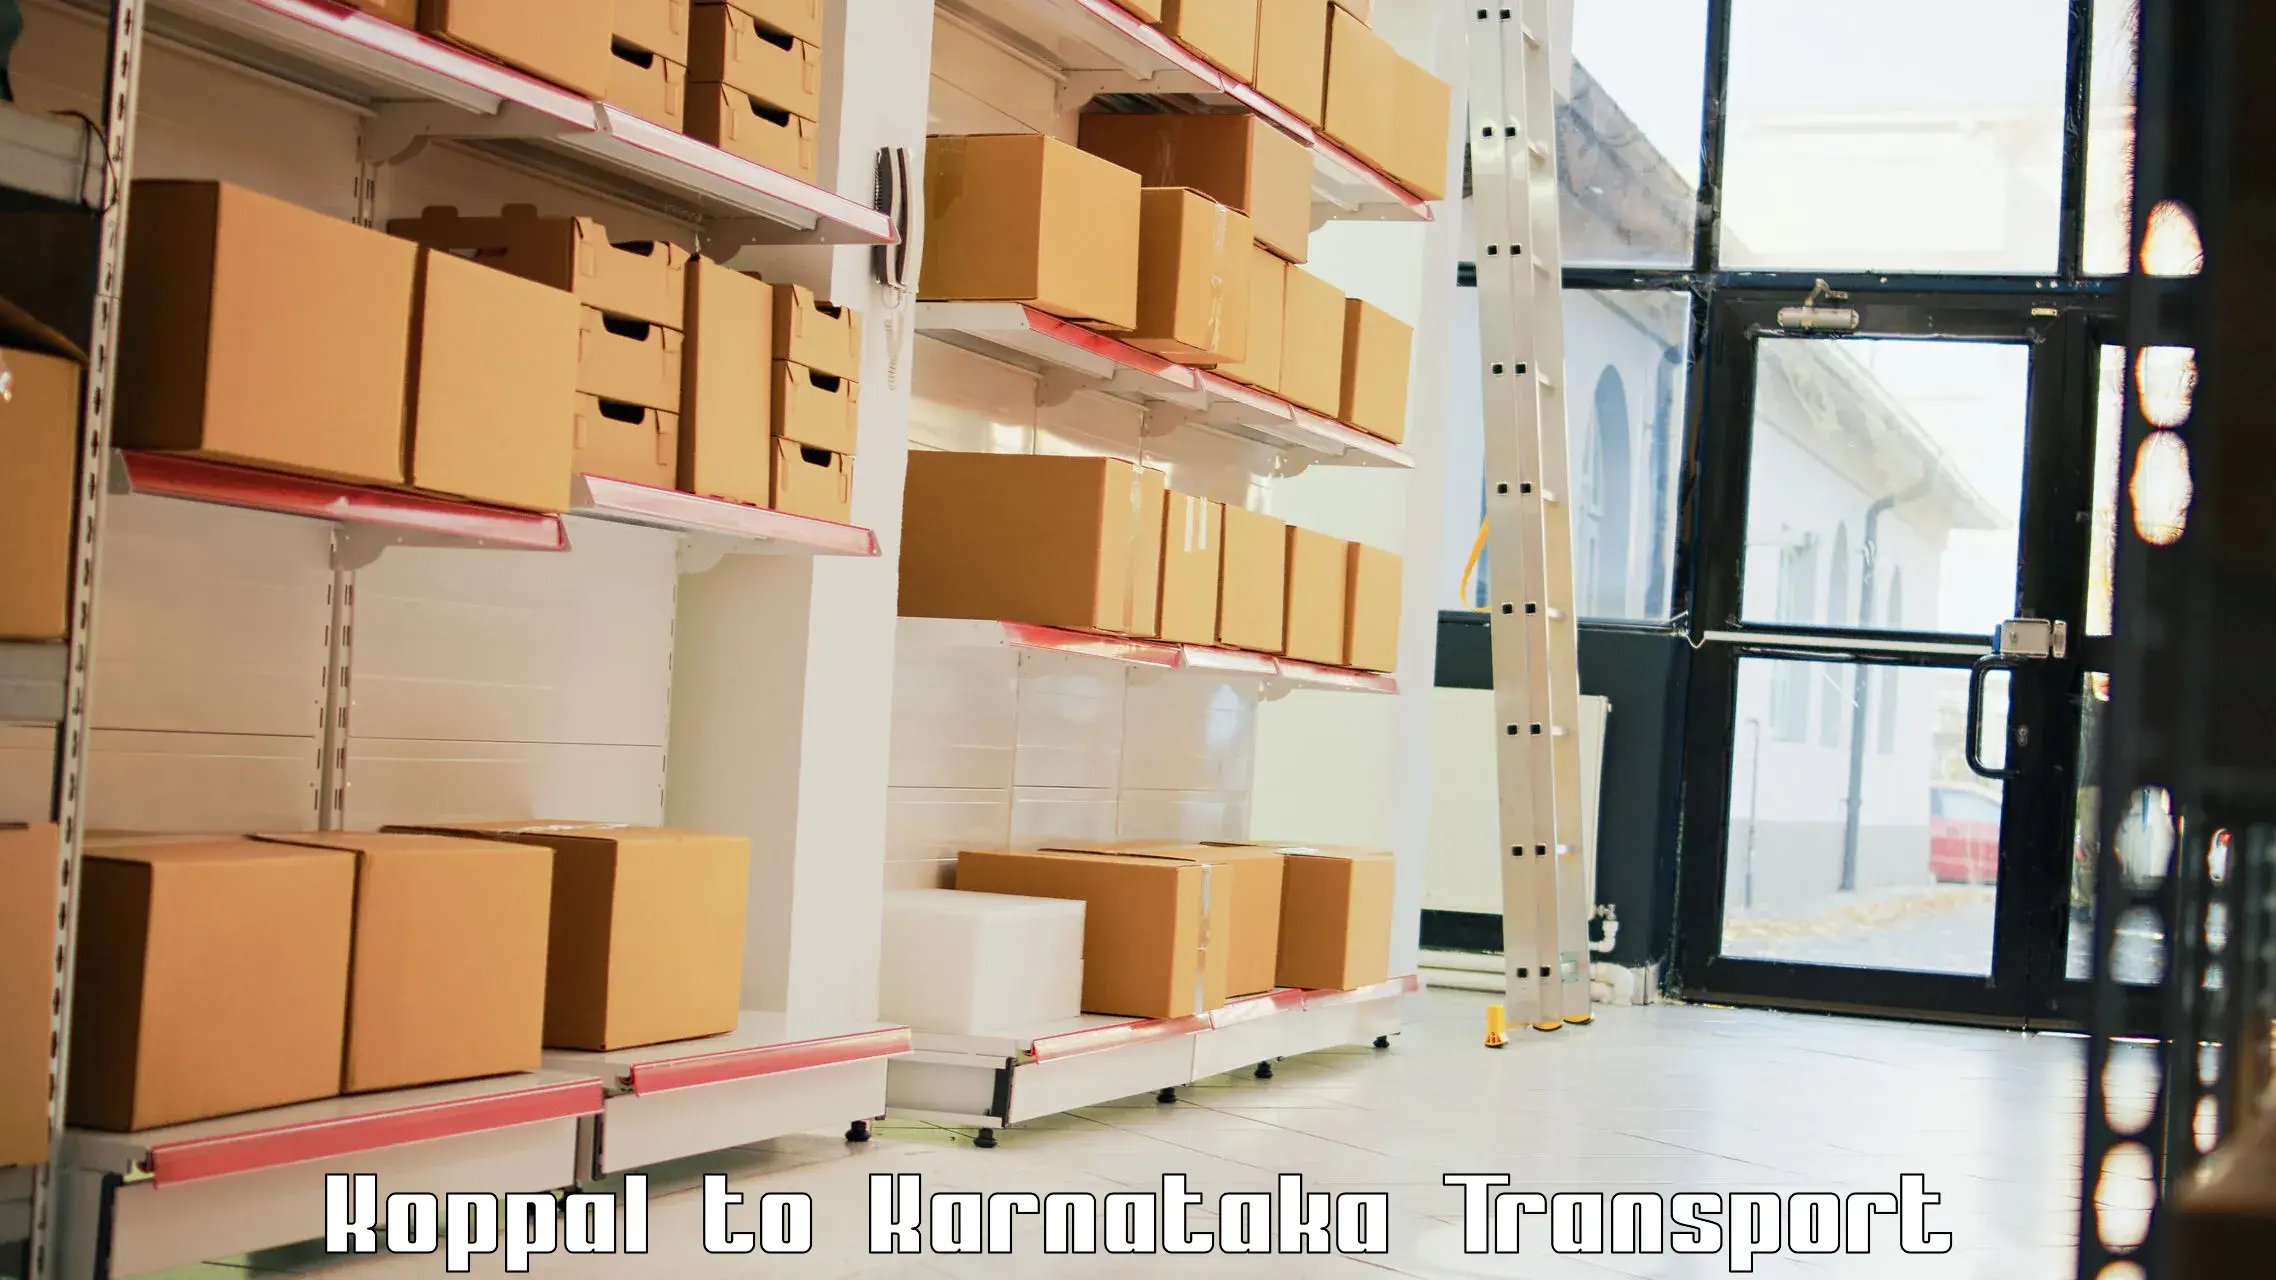 Truck transport companies in India Koppal to Bangalore